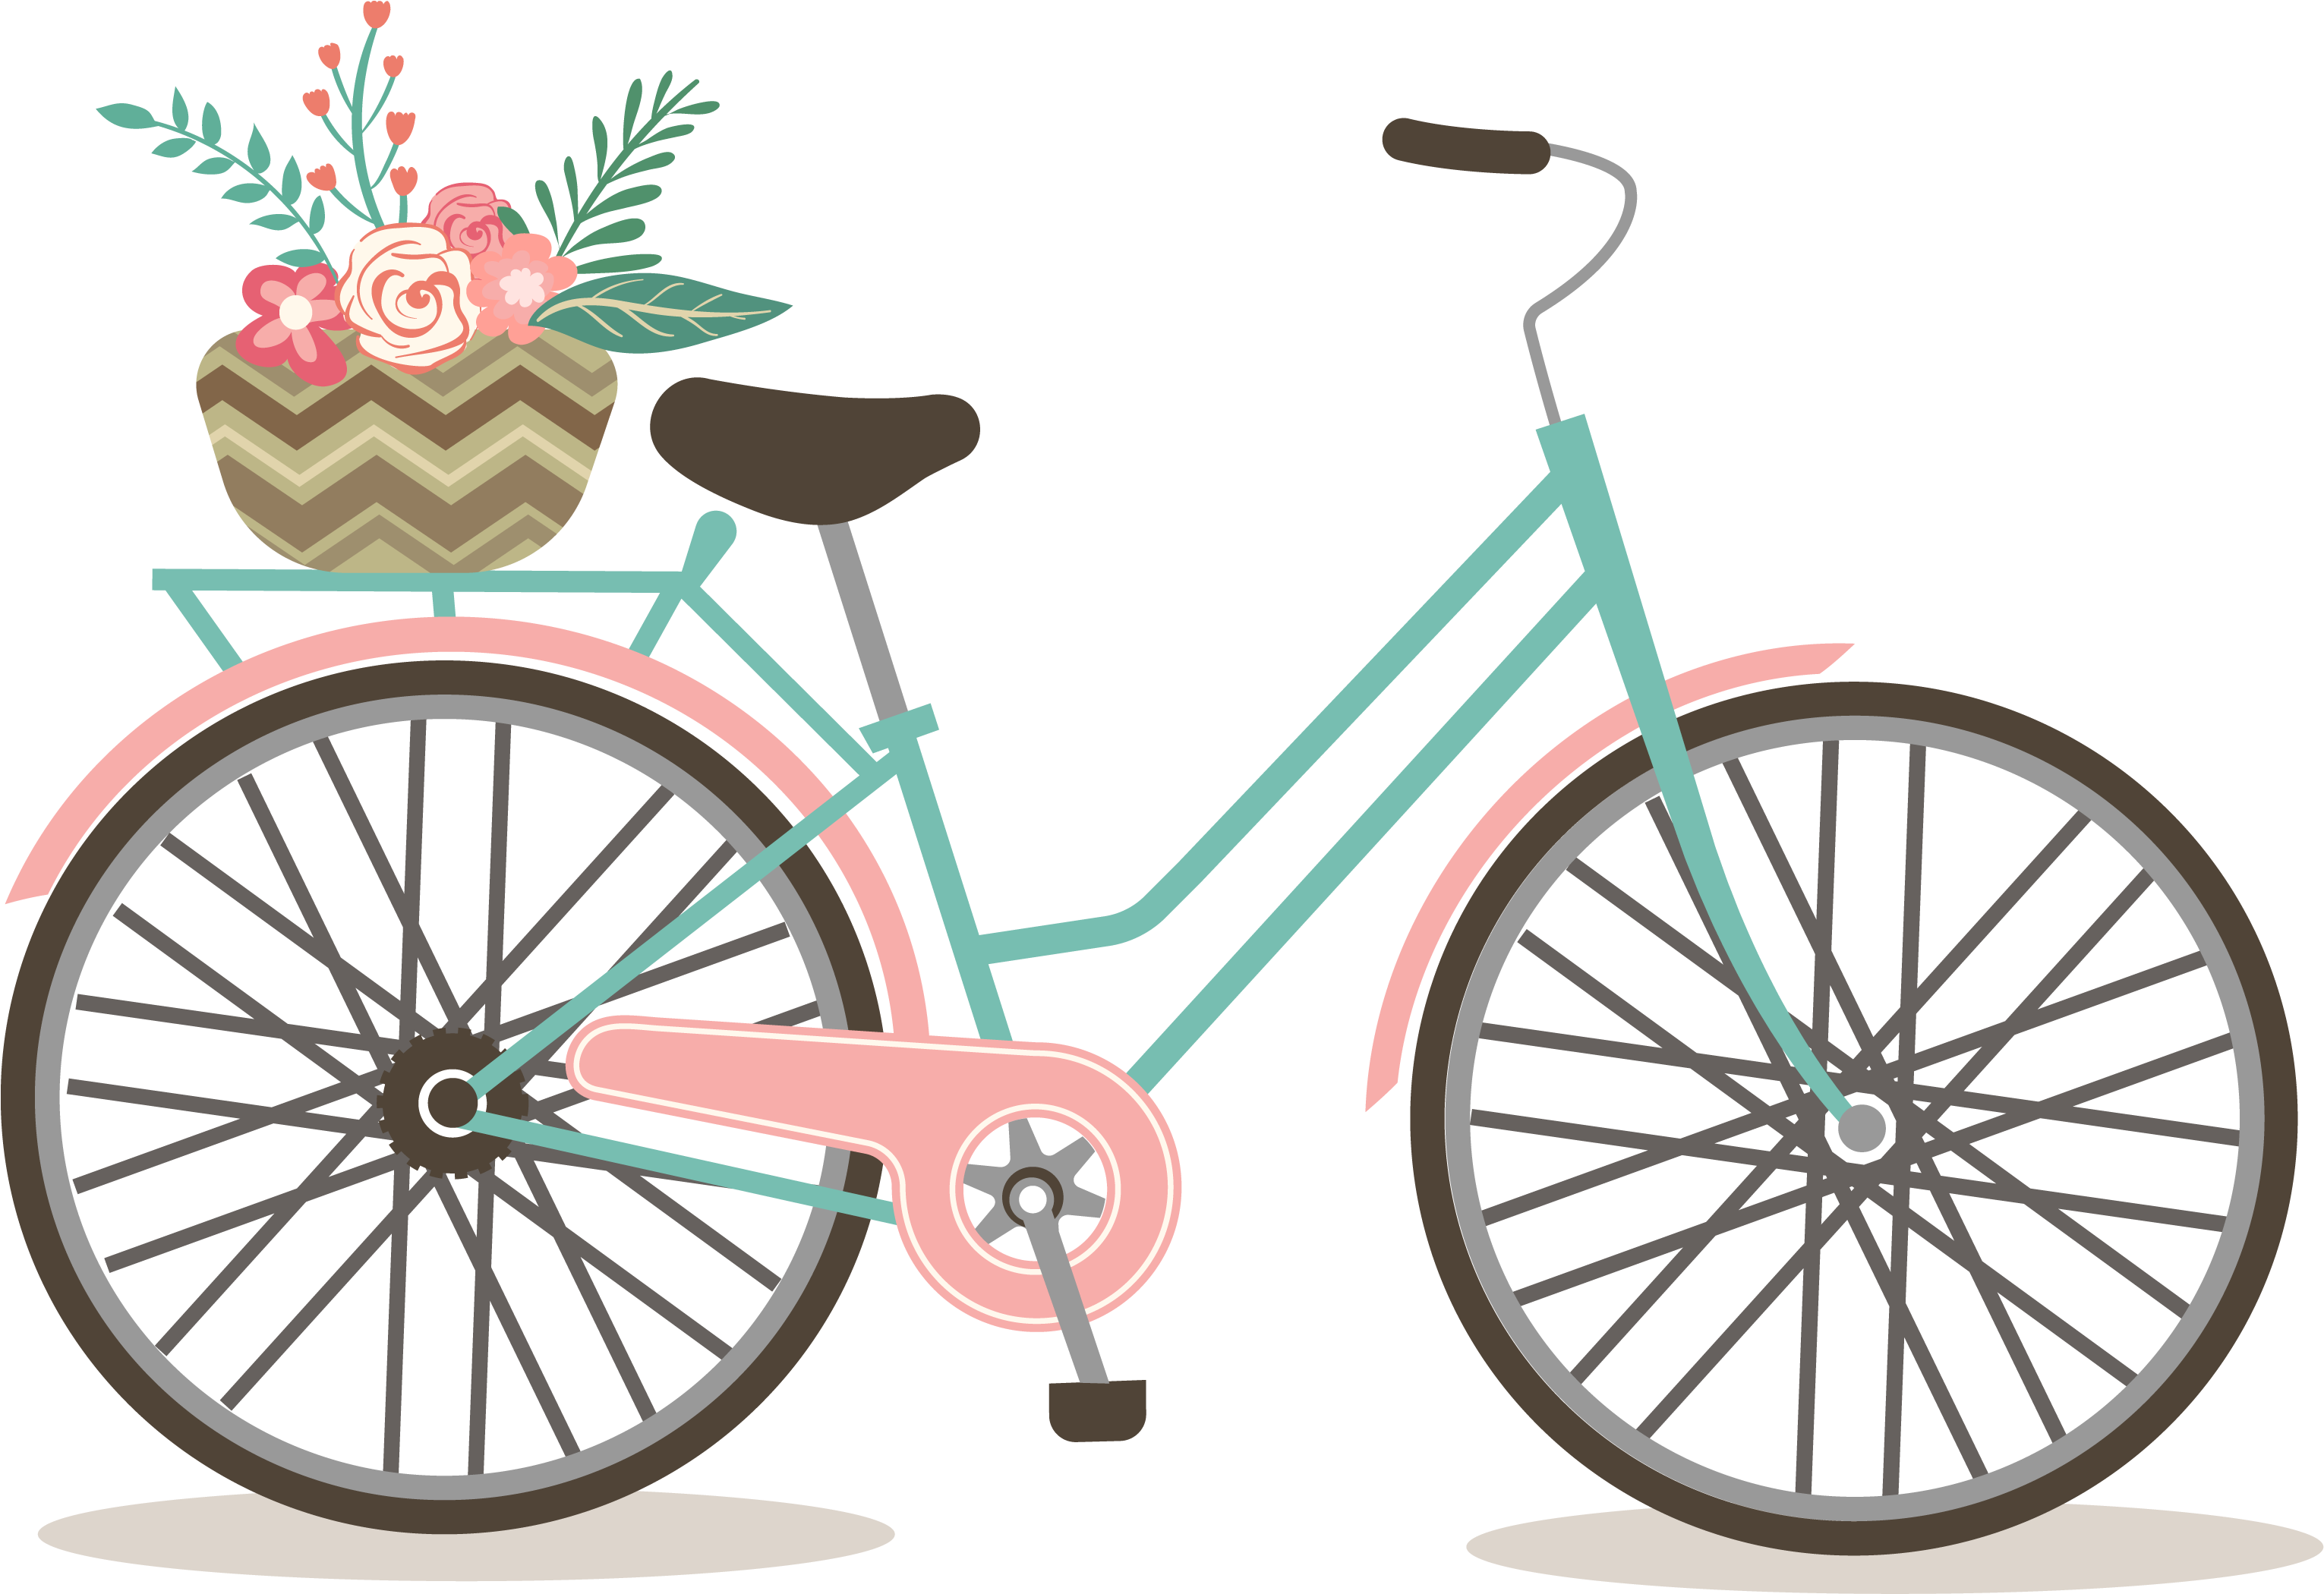 Bicycle Clip Art - Pretty Bicycle Clip Art (3300x2550)